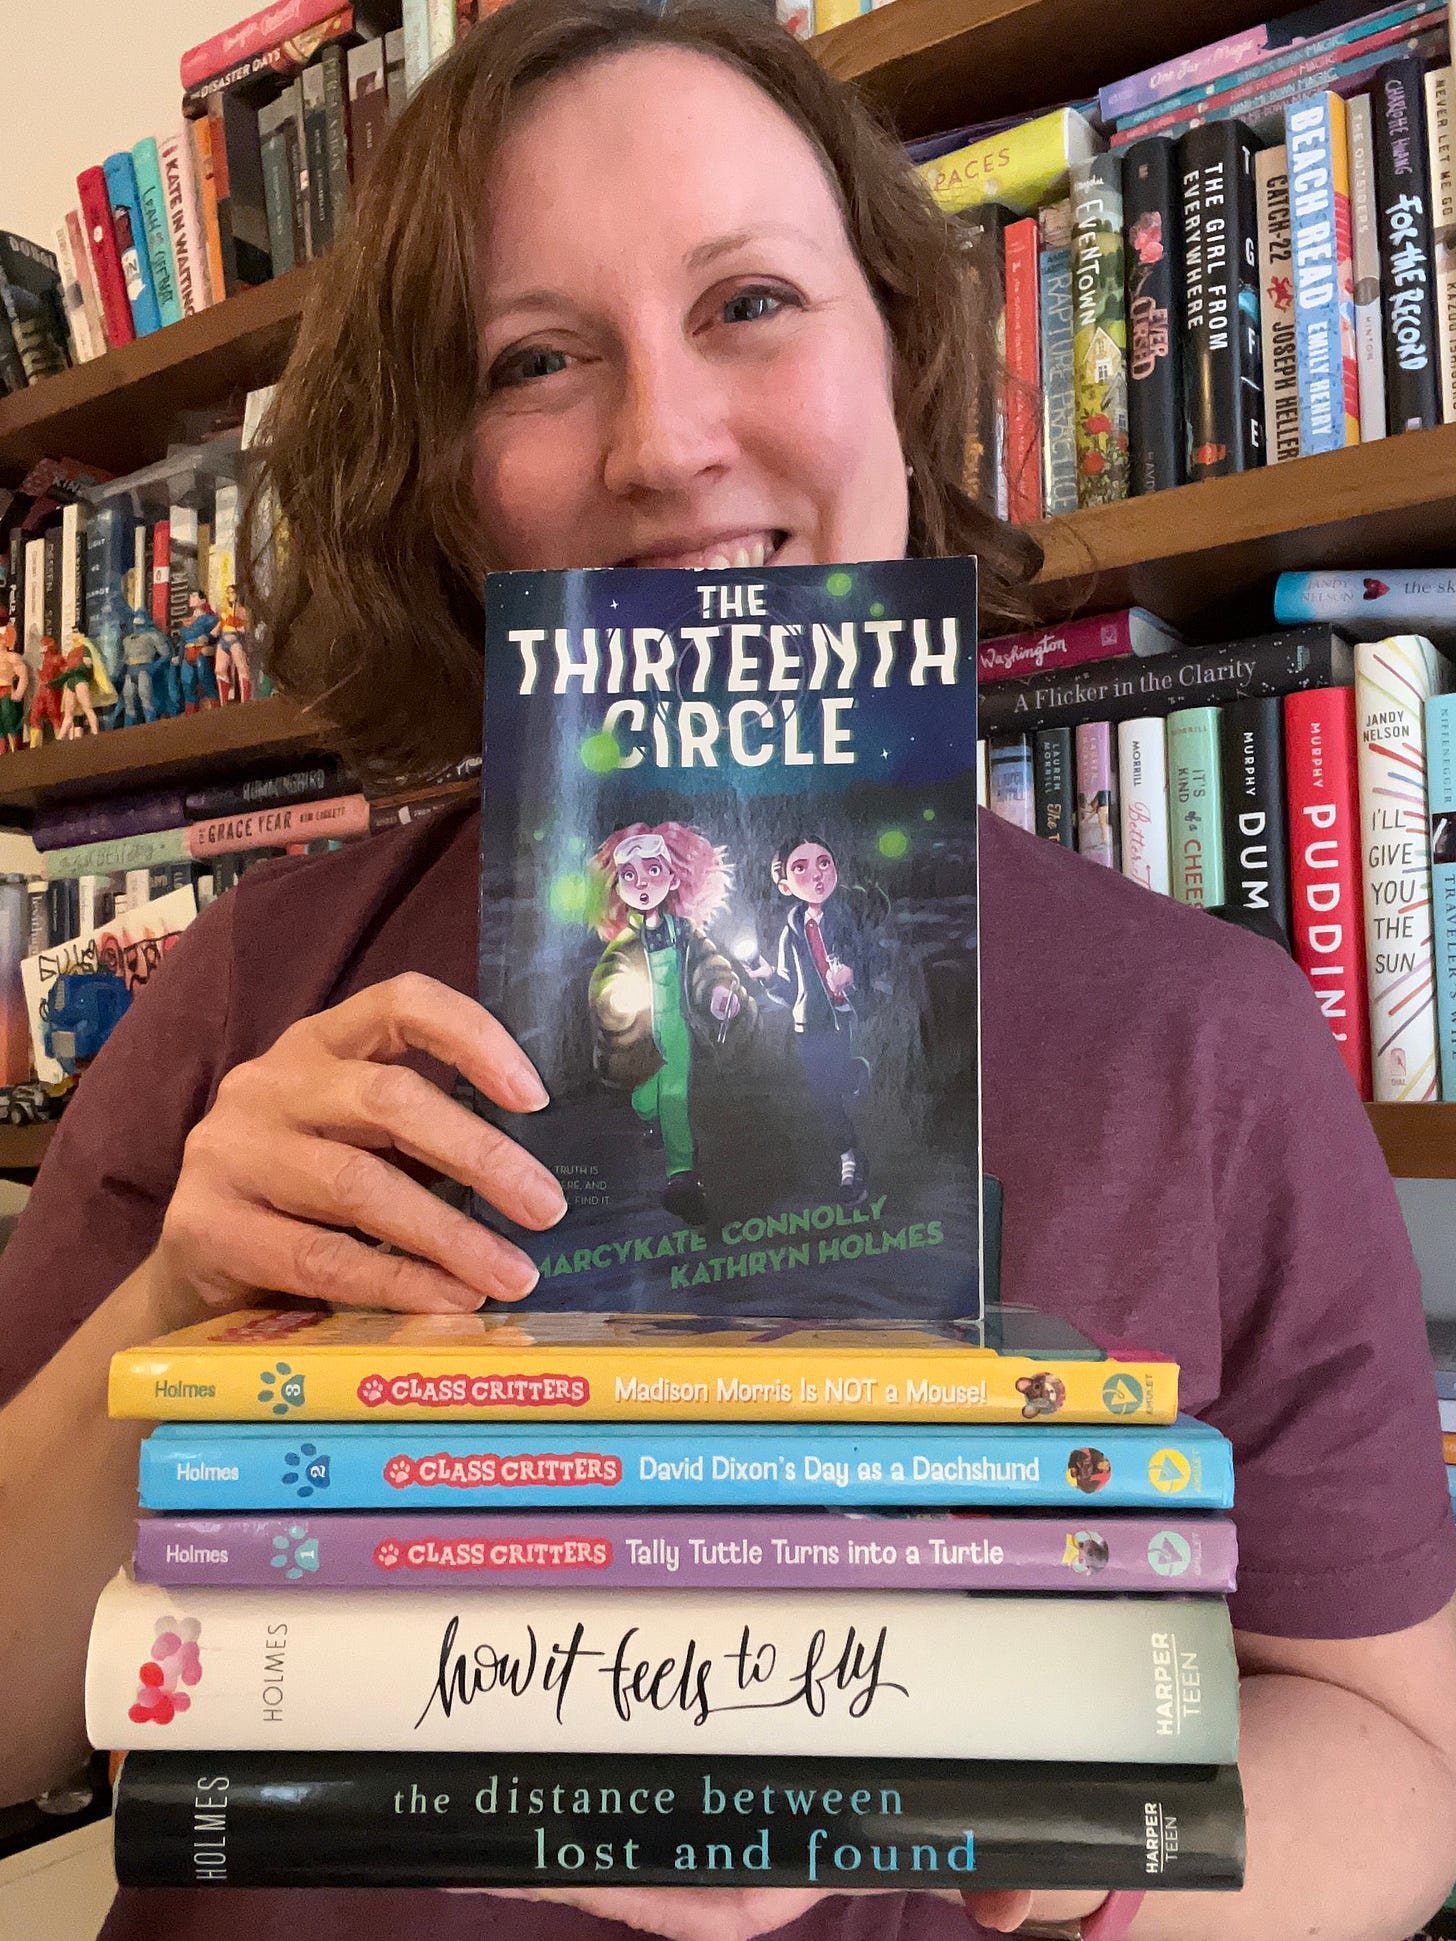 Kathryn poses with her six published books, The Thirteenth Circle at the top of the stack.